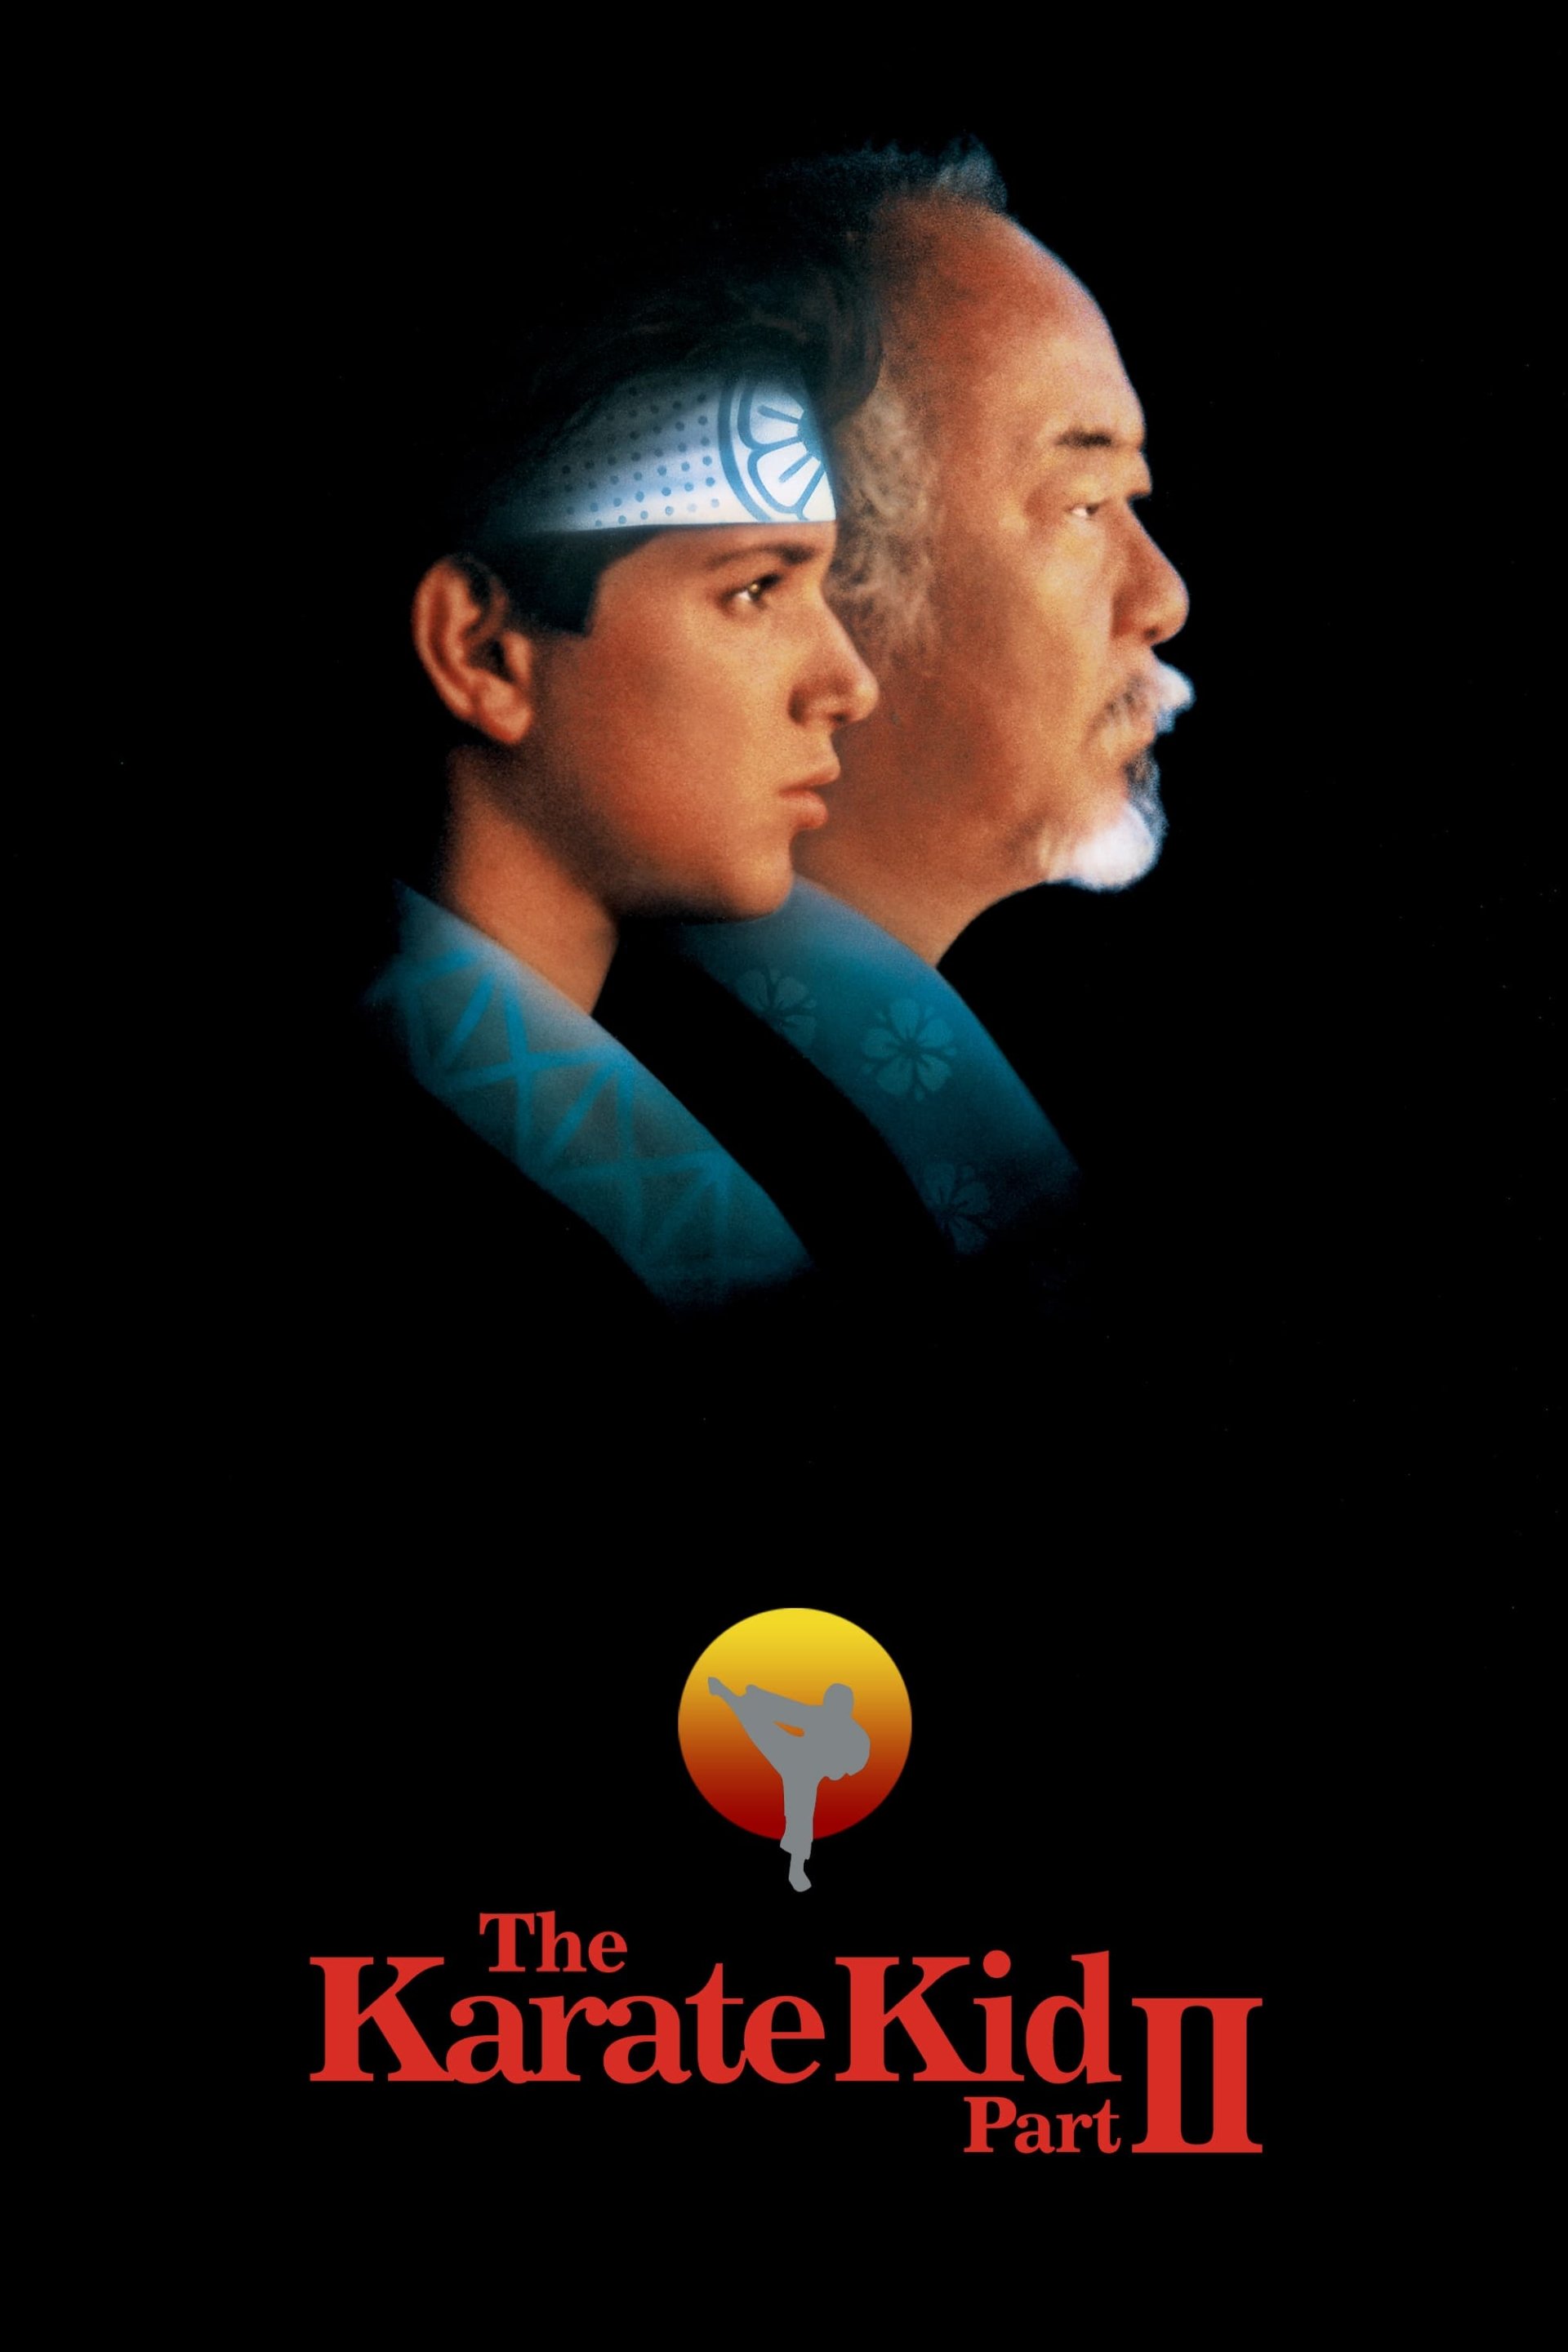 The Karate Kid Part II Movie Poster - ID: 350928 - Image Abyss